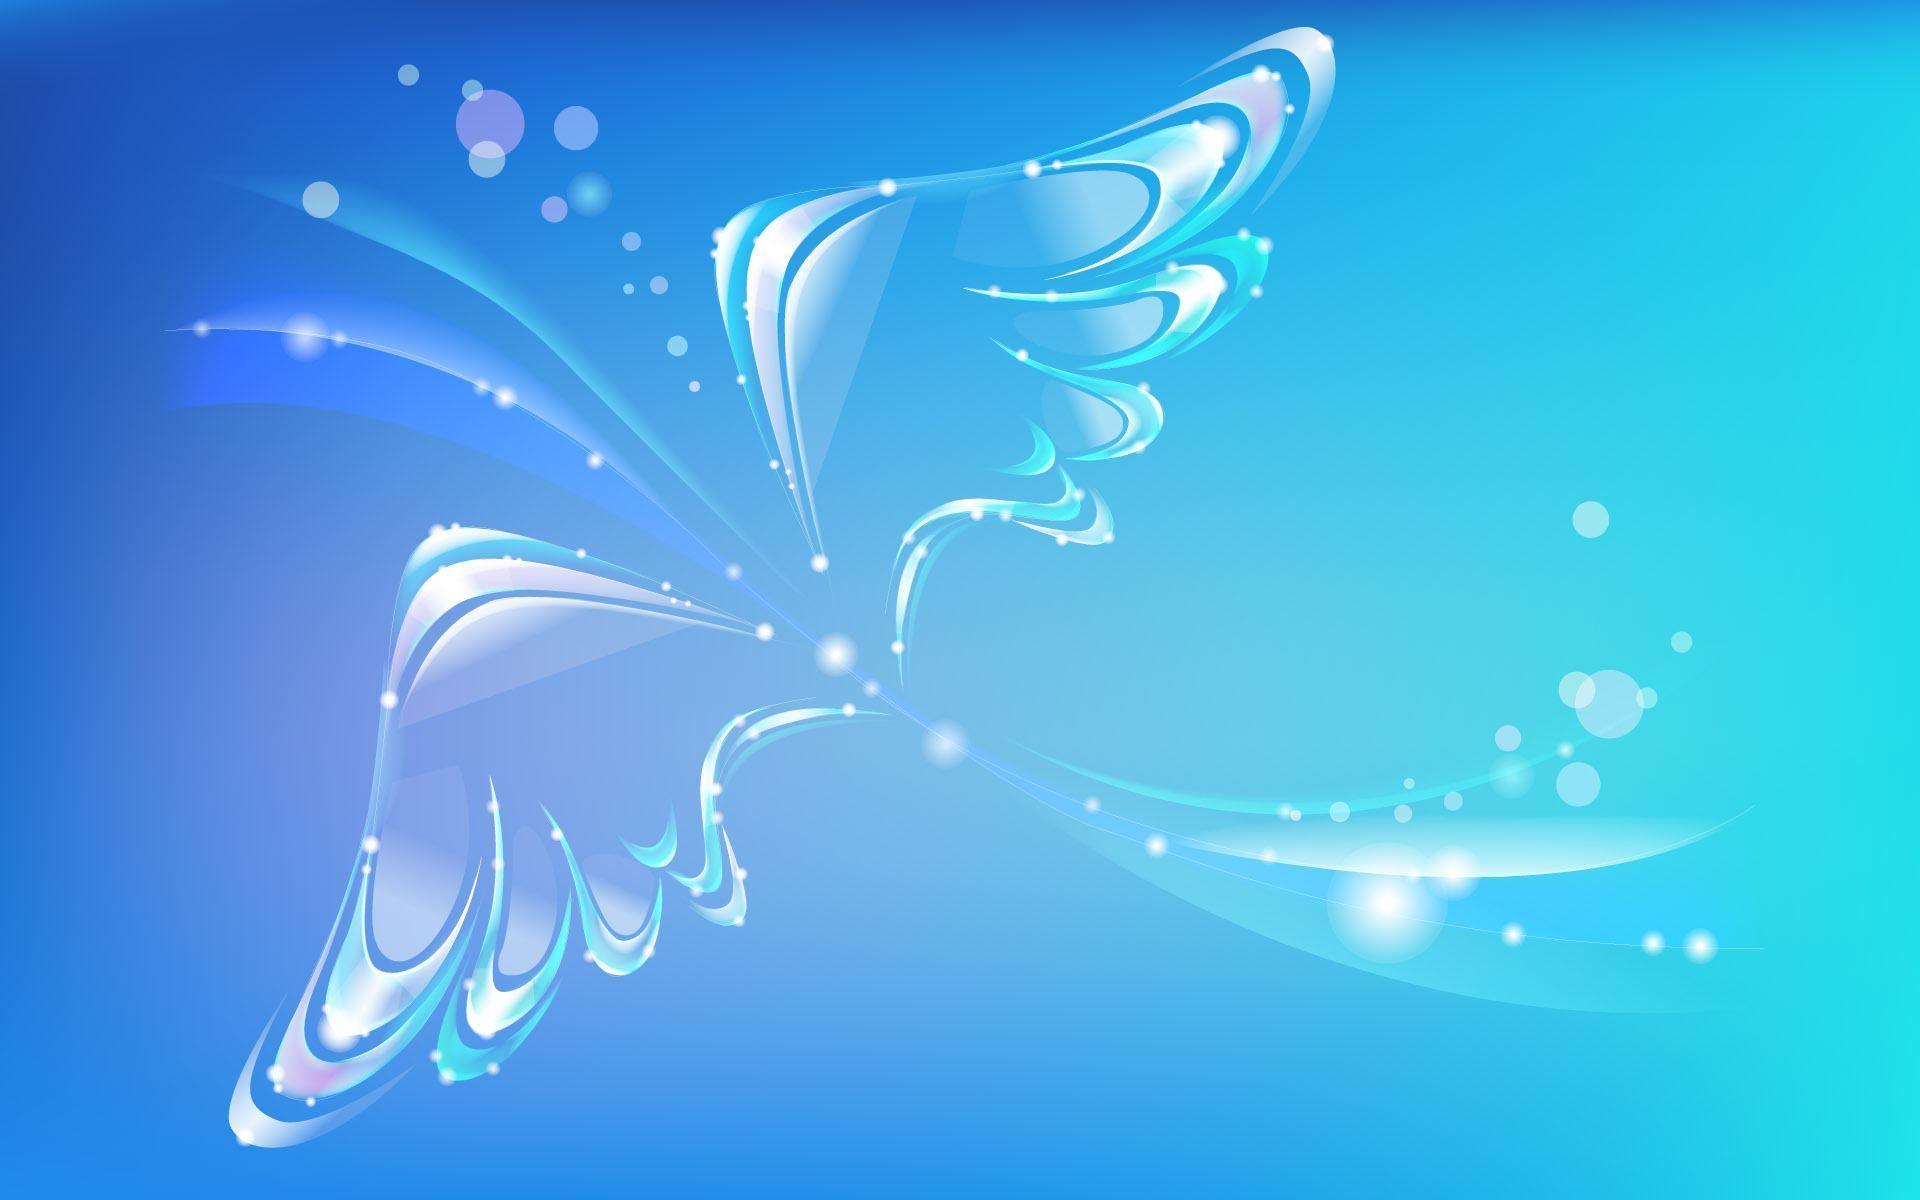 Wallpaper For > Blue Butterfly Abstract Background